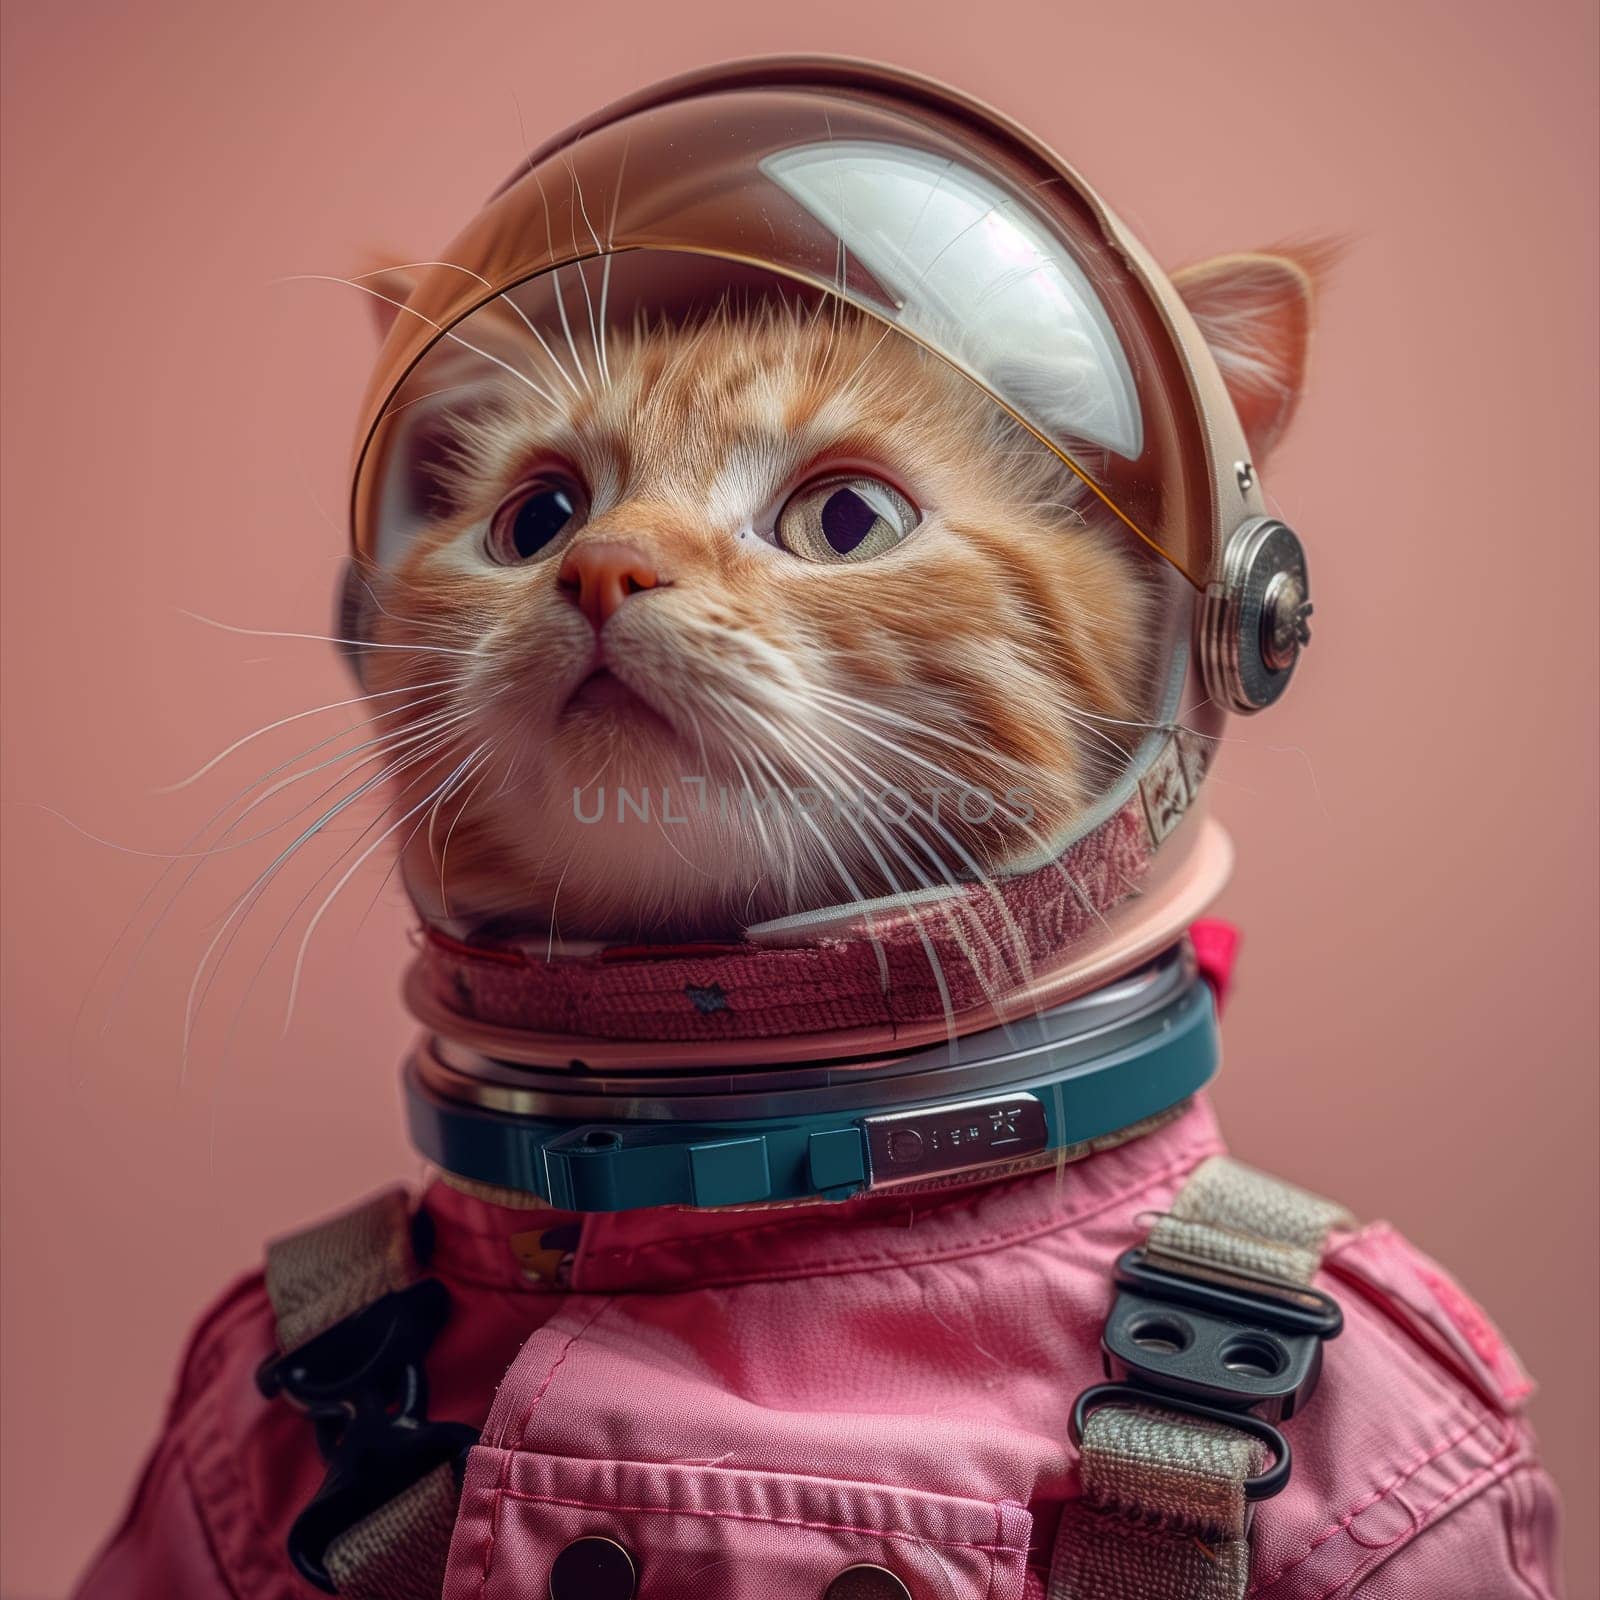 A Felidae carnivore, the cat is dressed in a pink space suit and helmet, exhibiting its whiskers and fur. This small to mediumsized feline looks adorable in its space attire